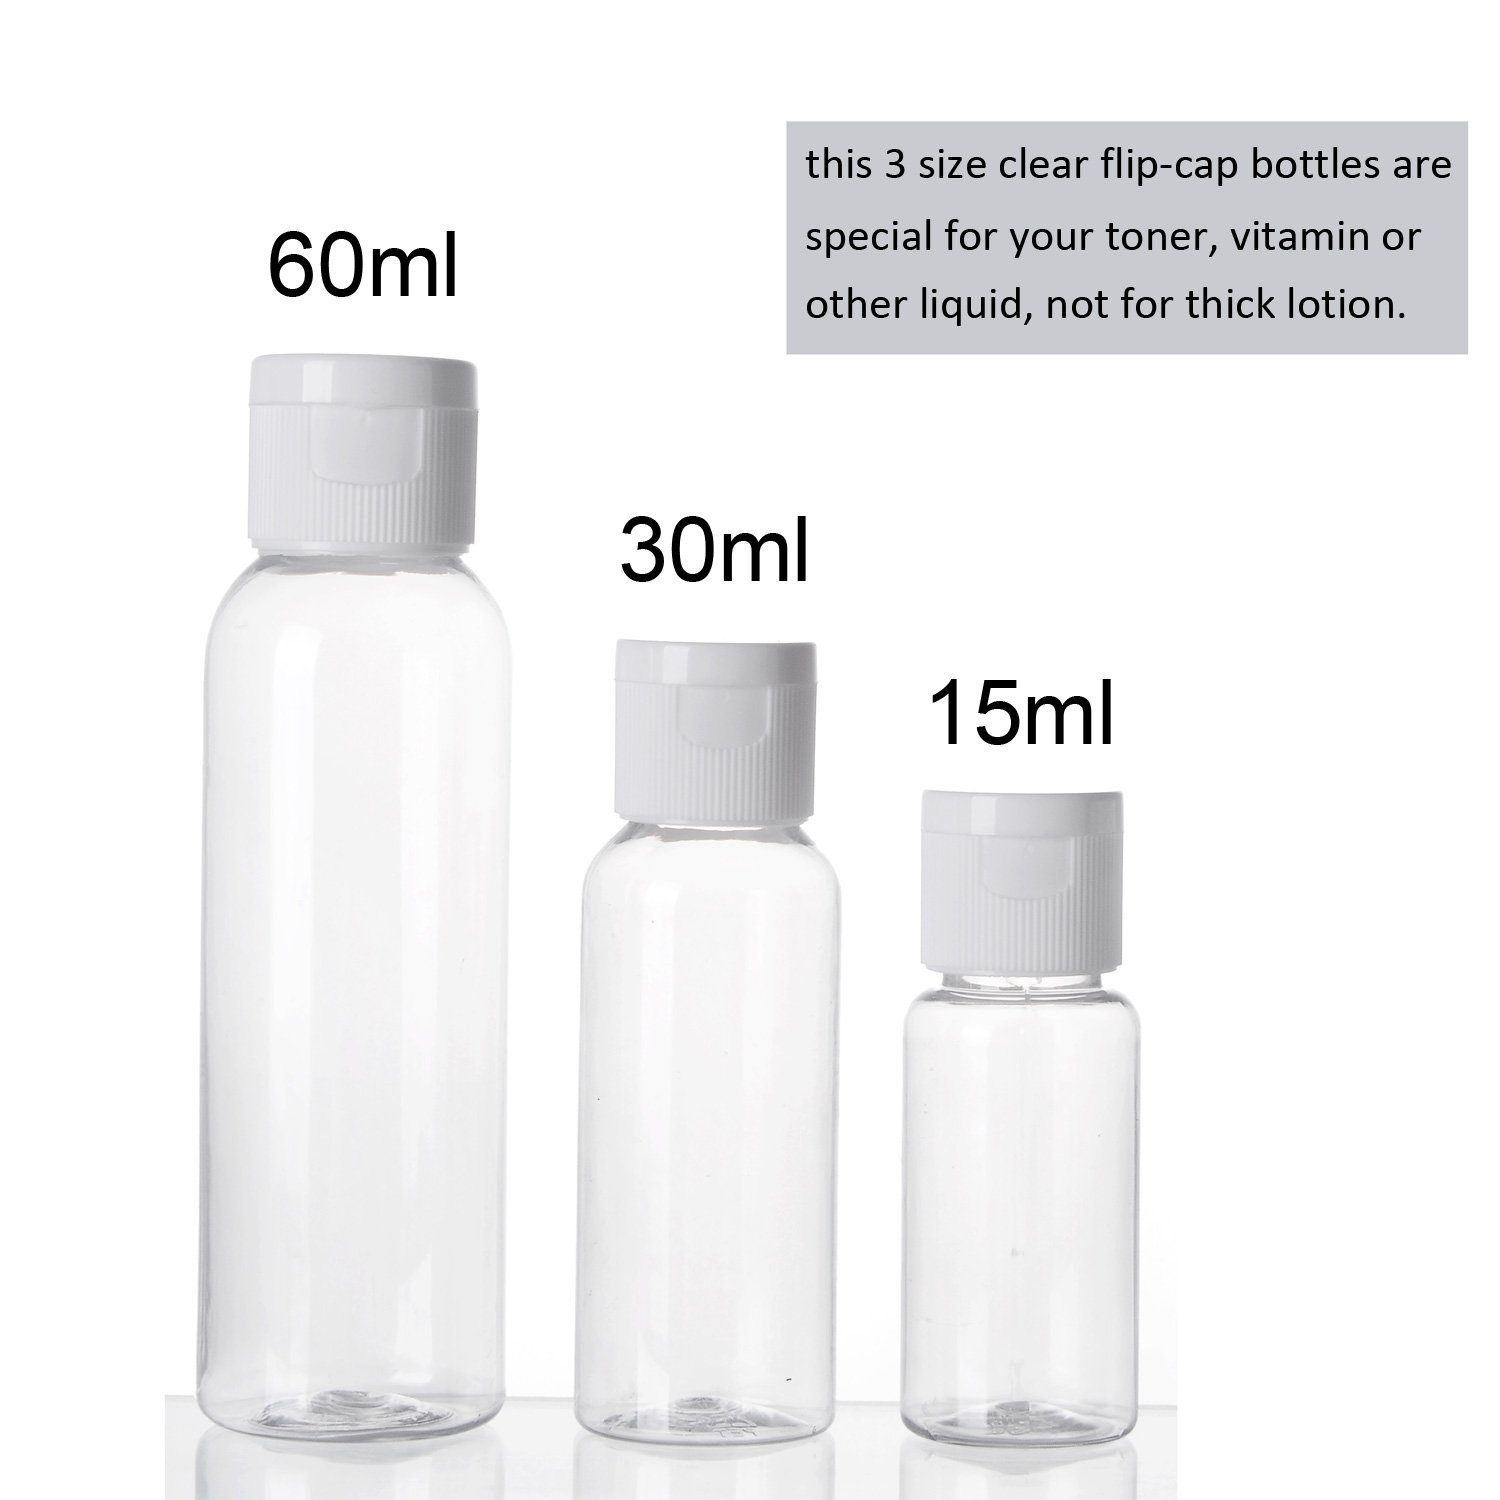 ALINK 16pcs Travel Size Toiletry Bottles Set, Tsa Approved Clear Cosmetic Makeup Liquid Containers with Zipper Bag